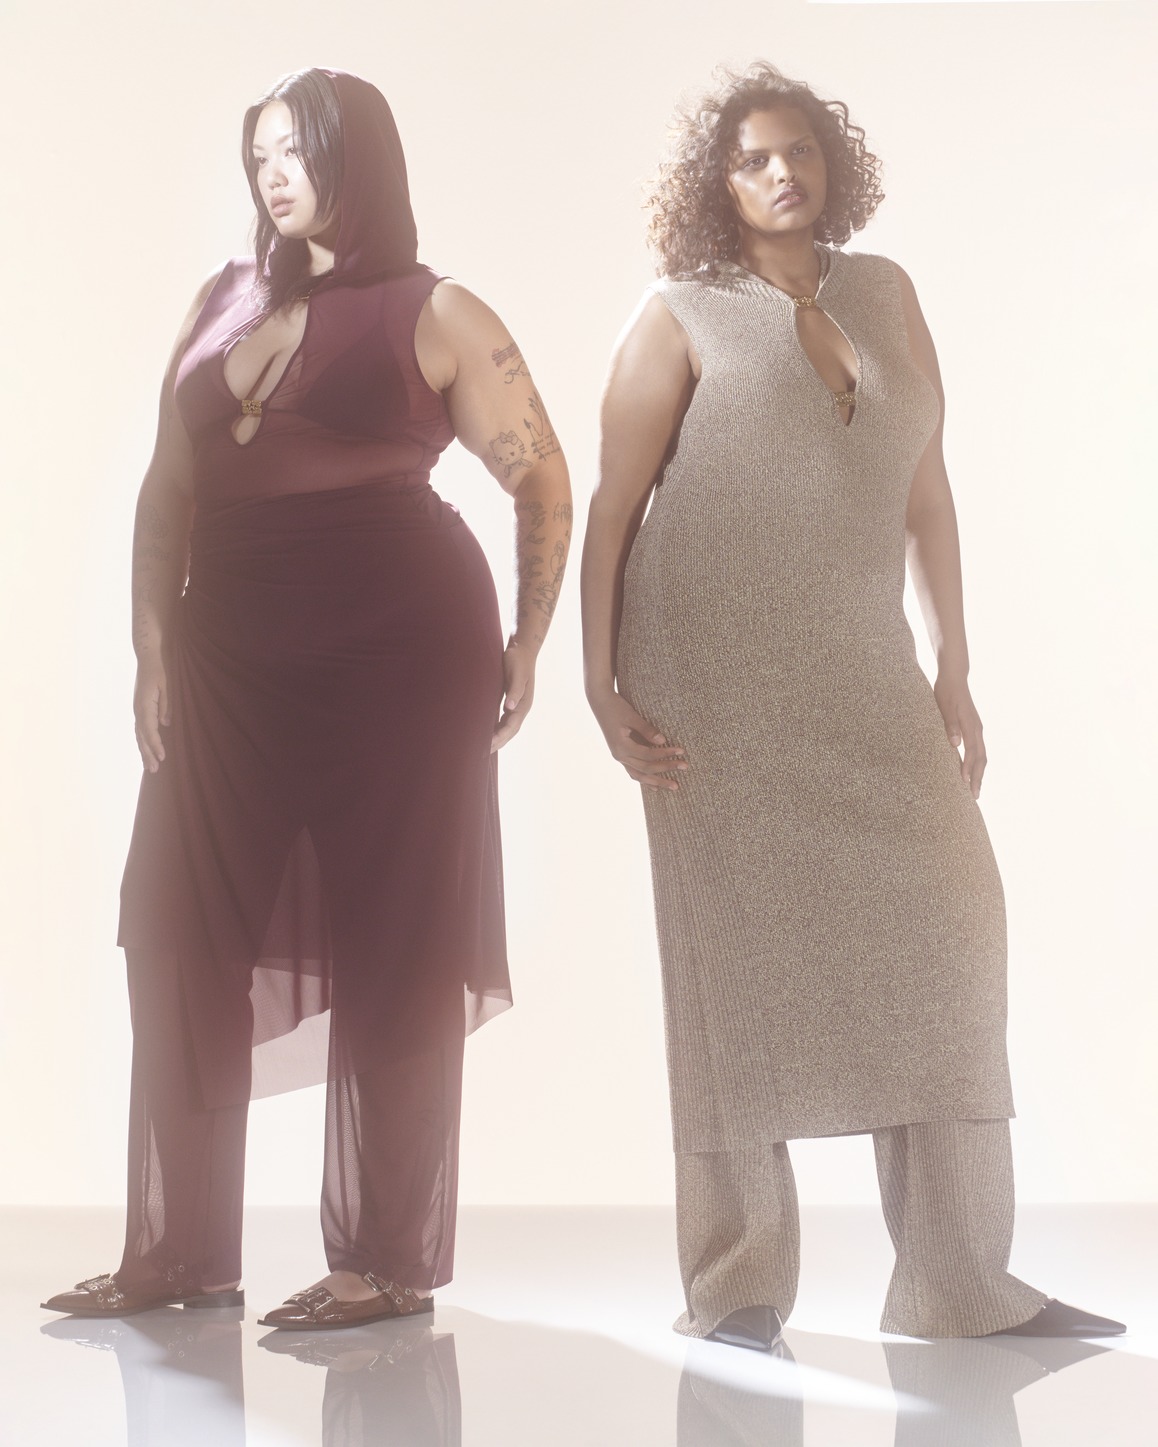 Ganni x Paloma Elsesser Campagin Photography featuring two dresses, each worn over pants